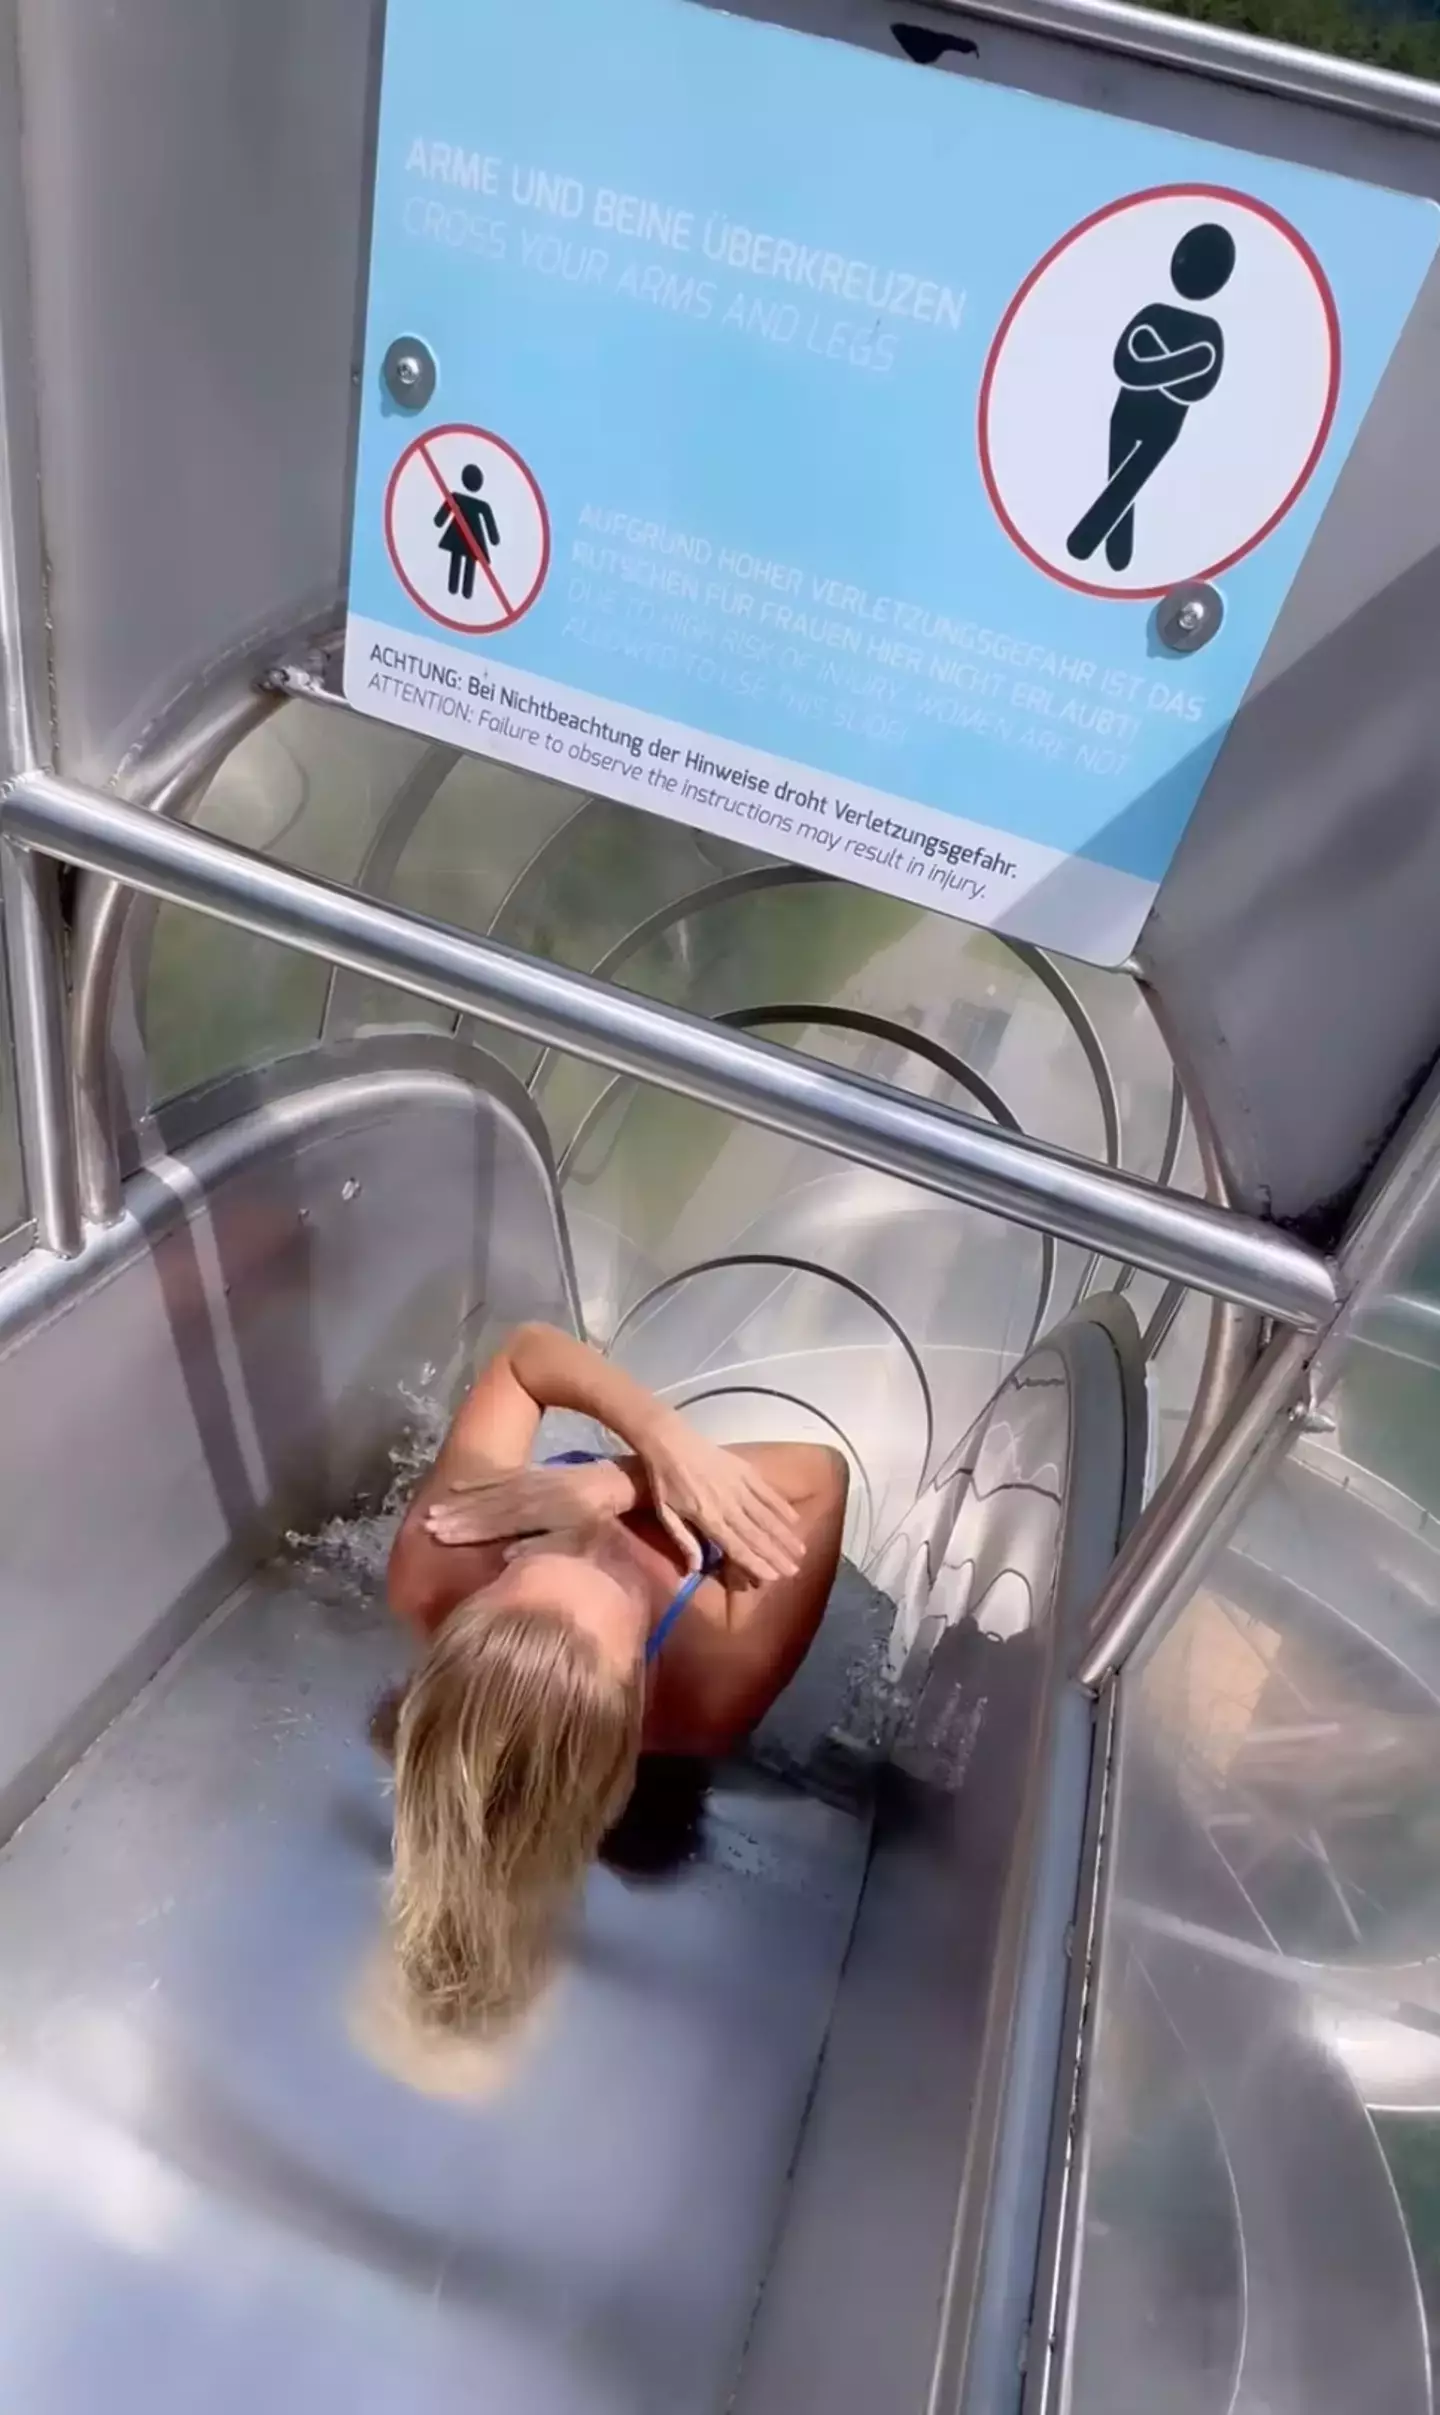 The slide has a sign prohibiting women from riding. (Instagram/@rhiannan_iffland)